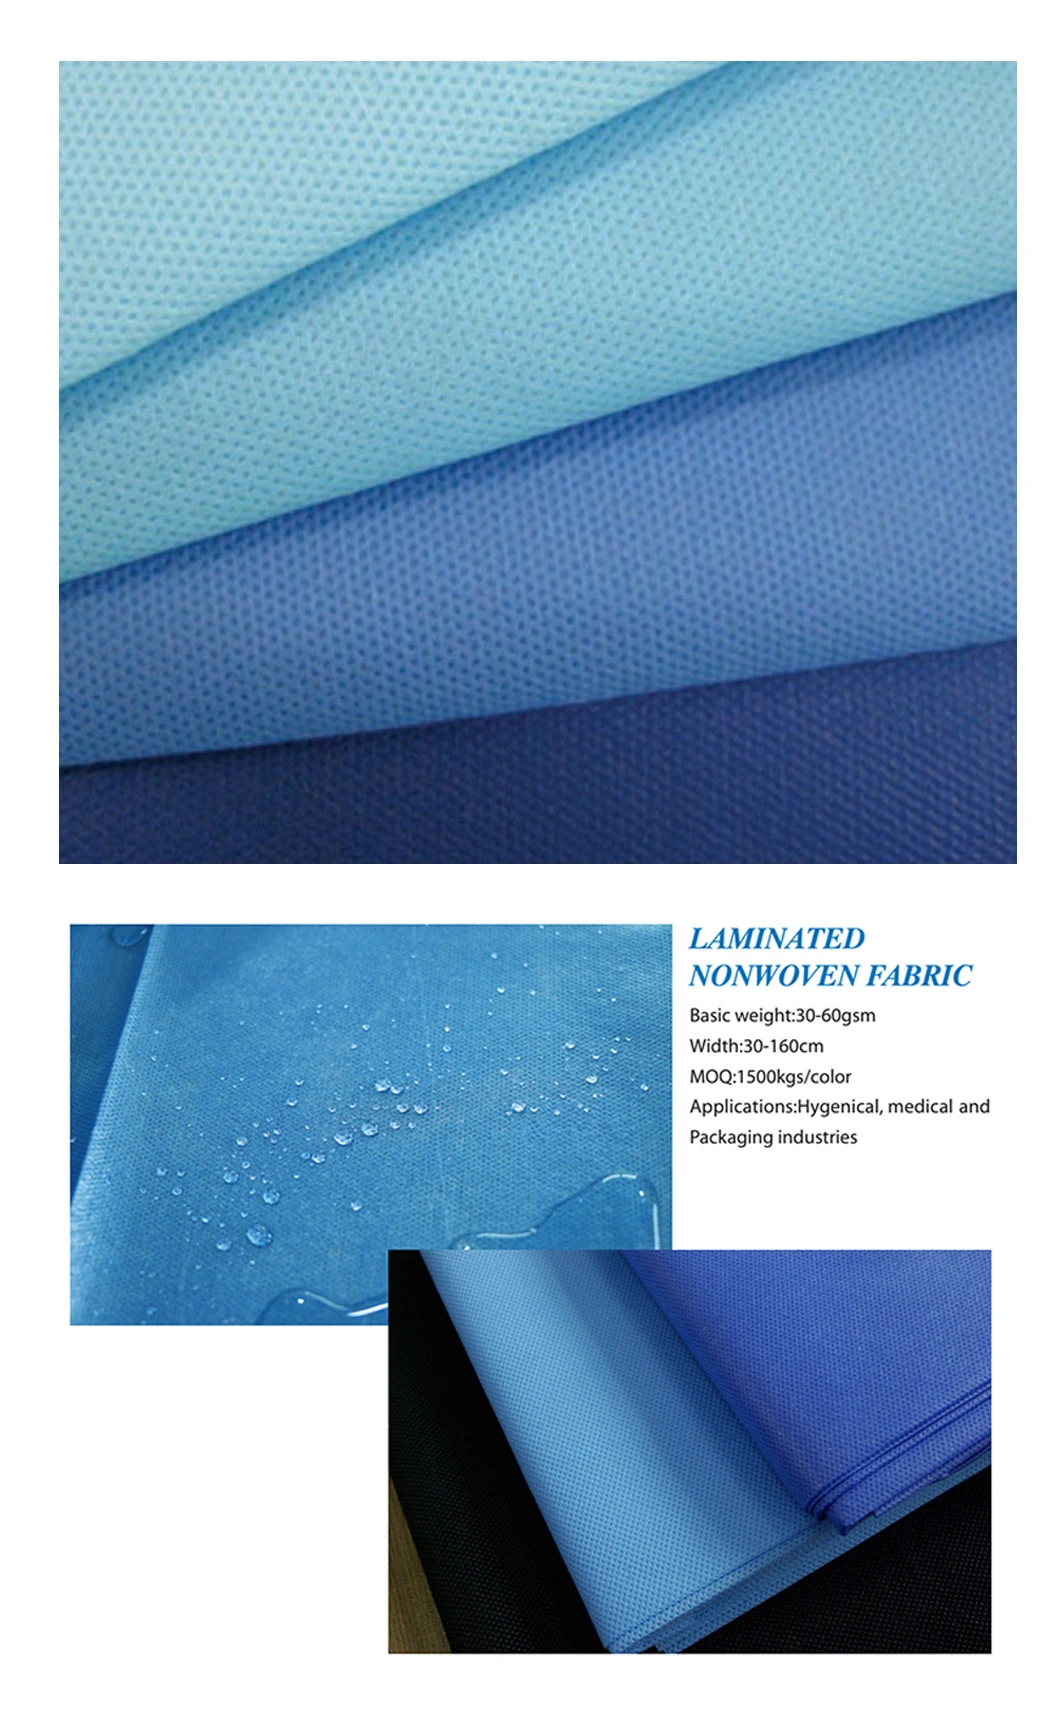 PP Non-Woven Raw Fabric Used for Making Masks Is Moisture-Proof and Breathable for 25 Grams